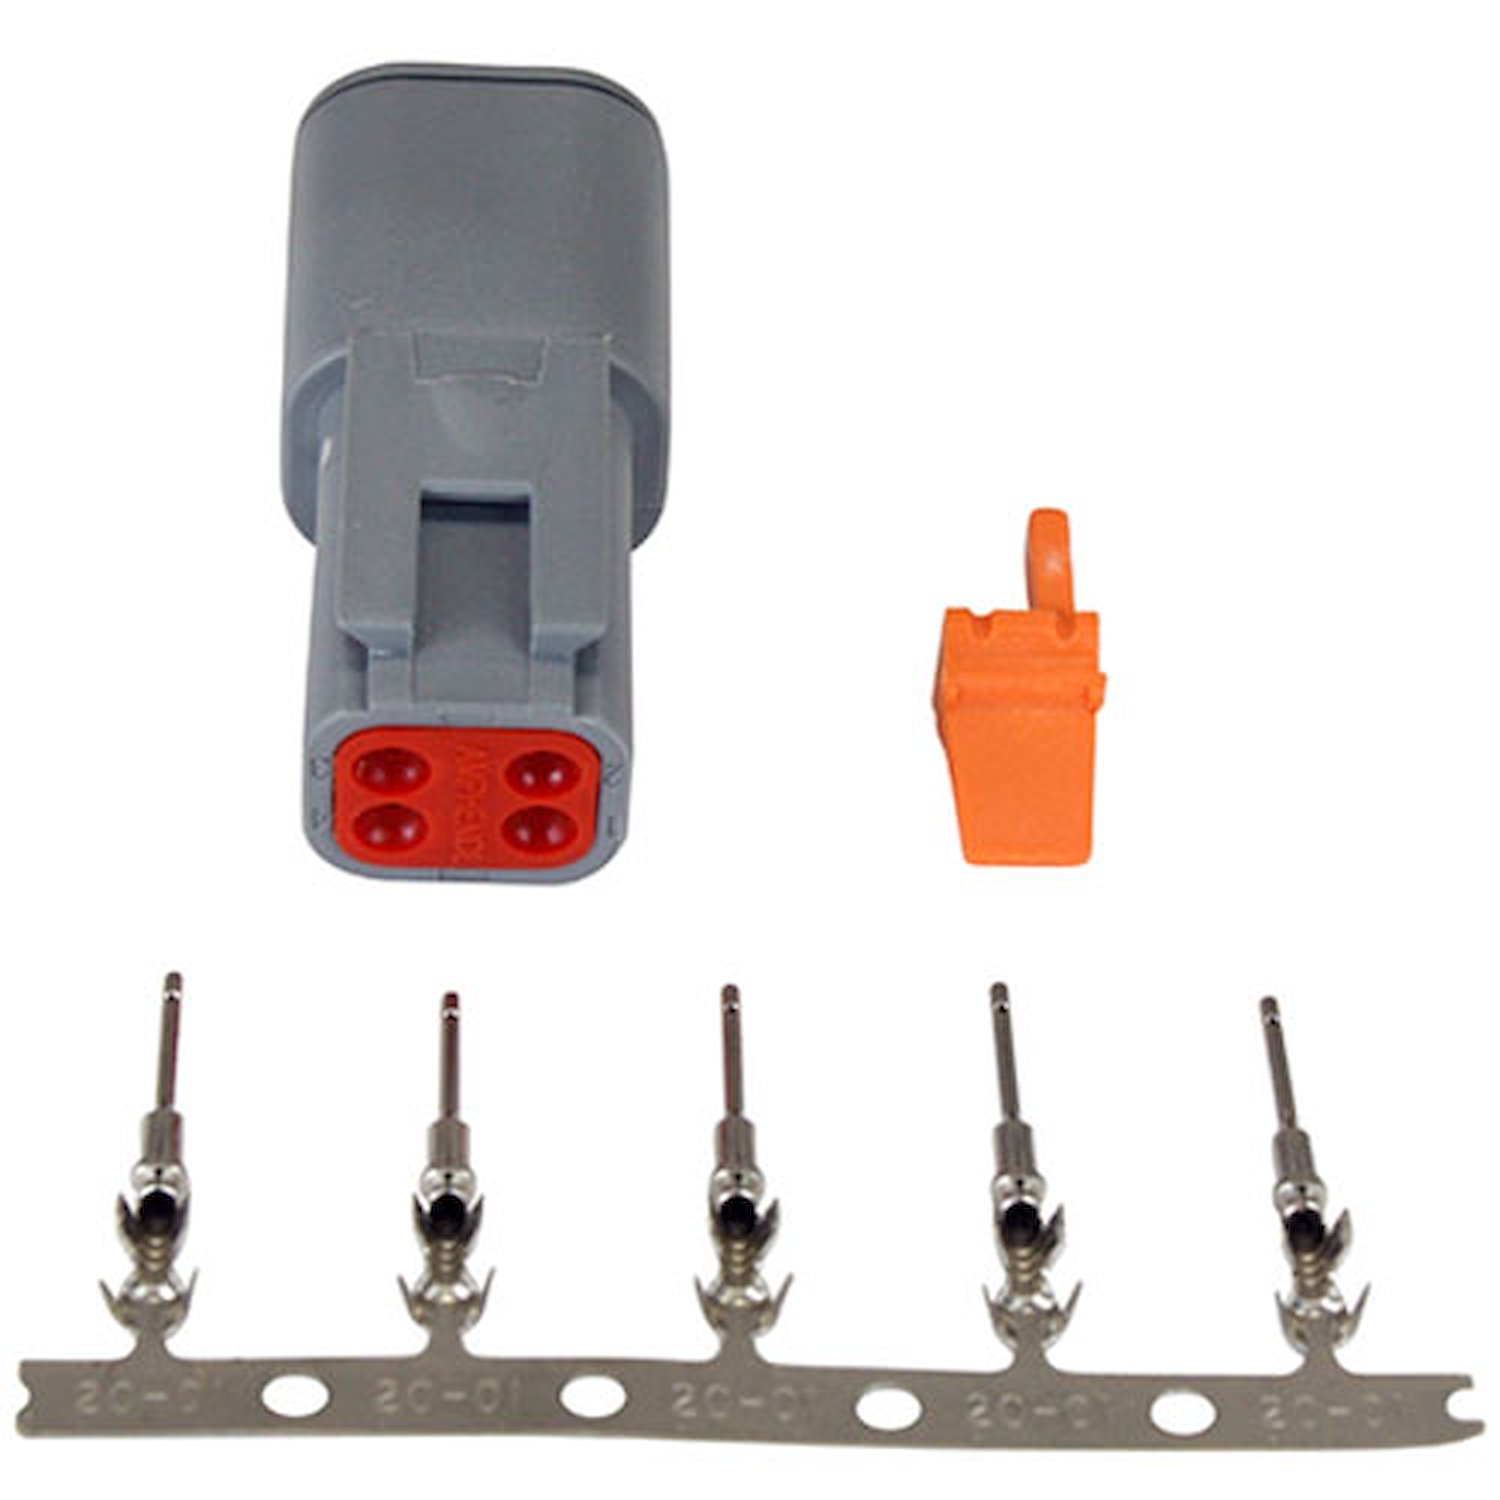 DTM-Style 4-Way Receptacle Connector Kit Includes Receptacle, Receptacle Wedge Lock And 5 Male Pins